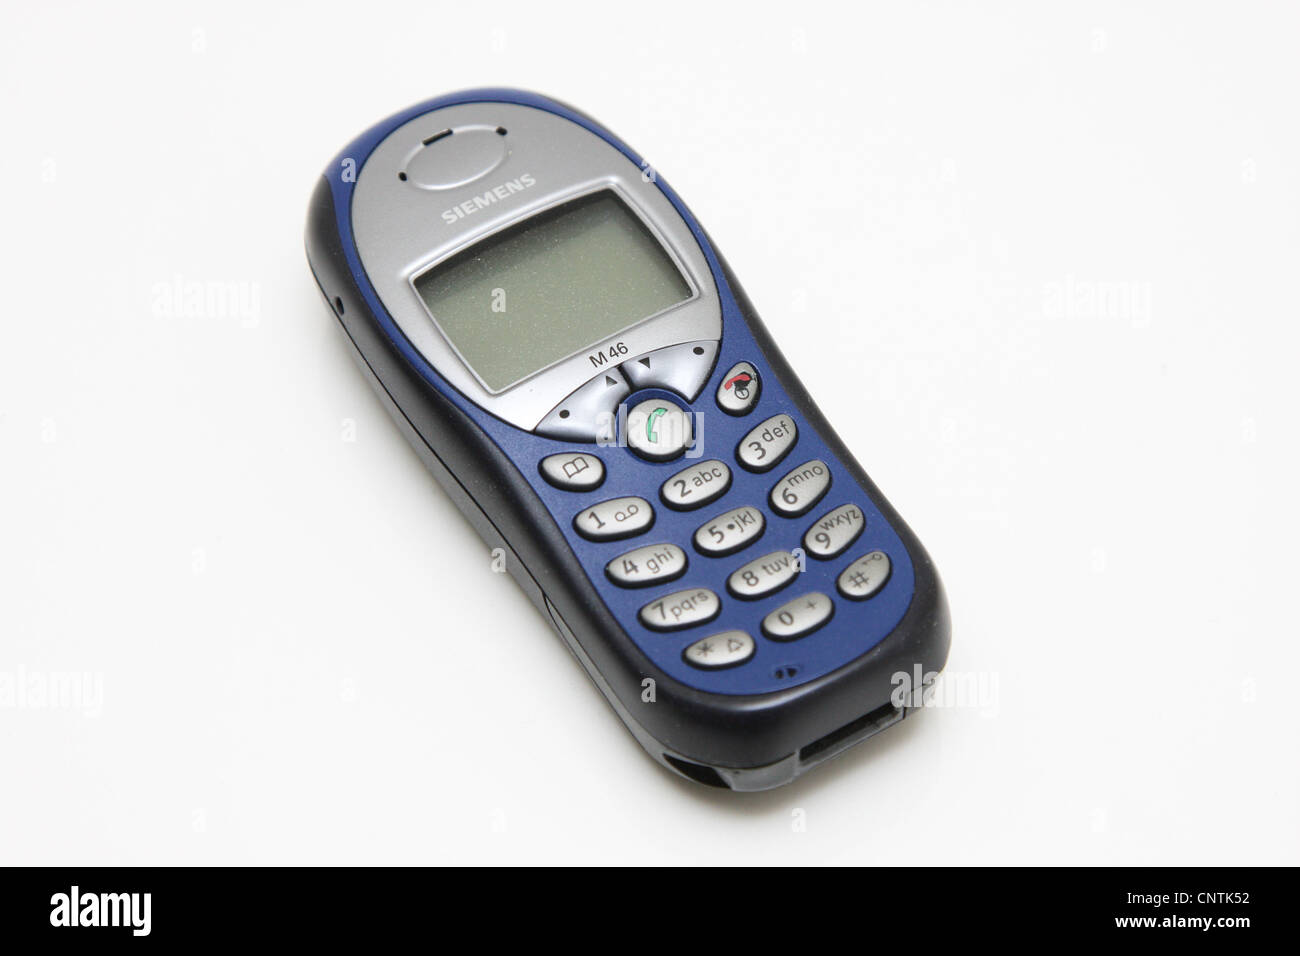 Siemens cell mobile phone Stock Photo